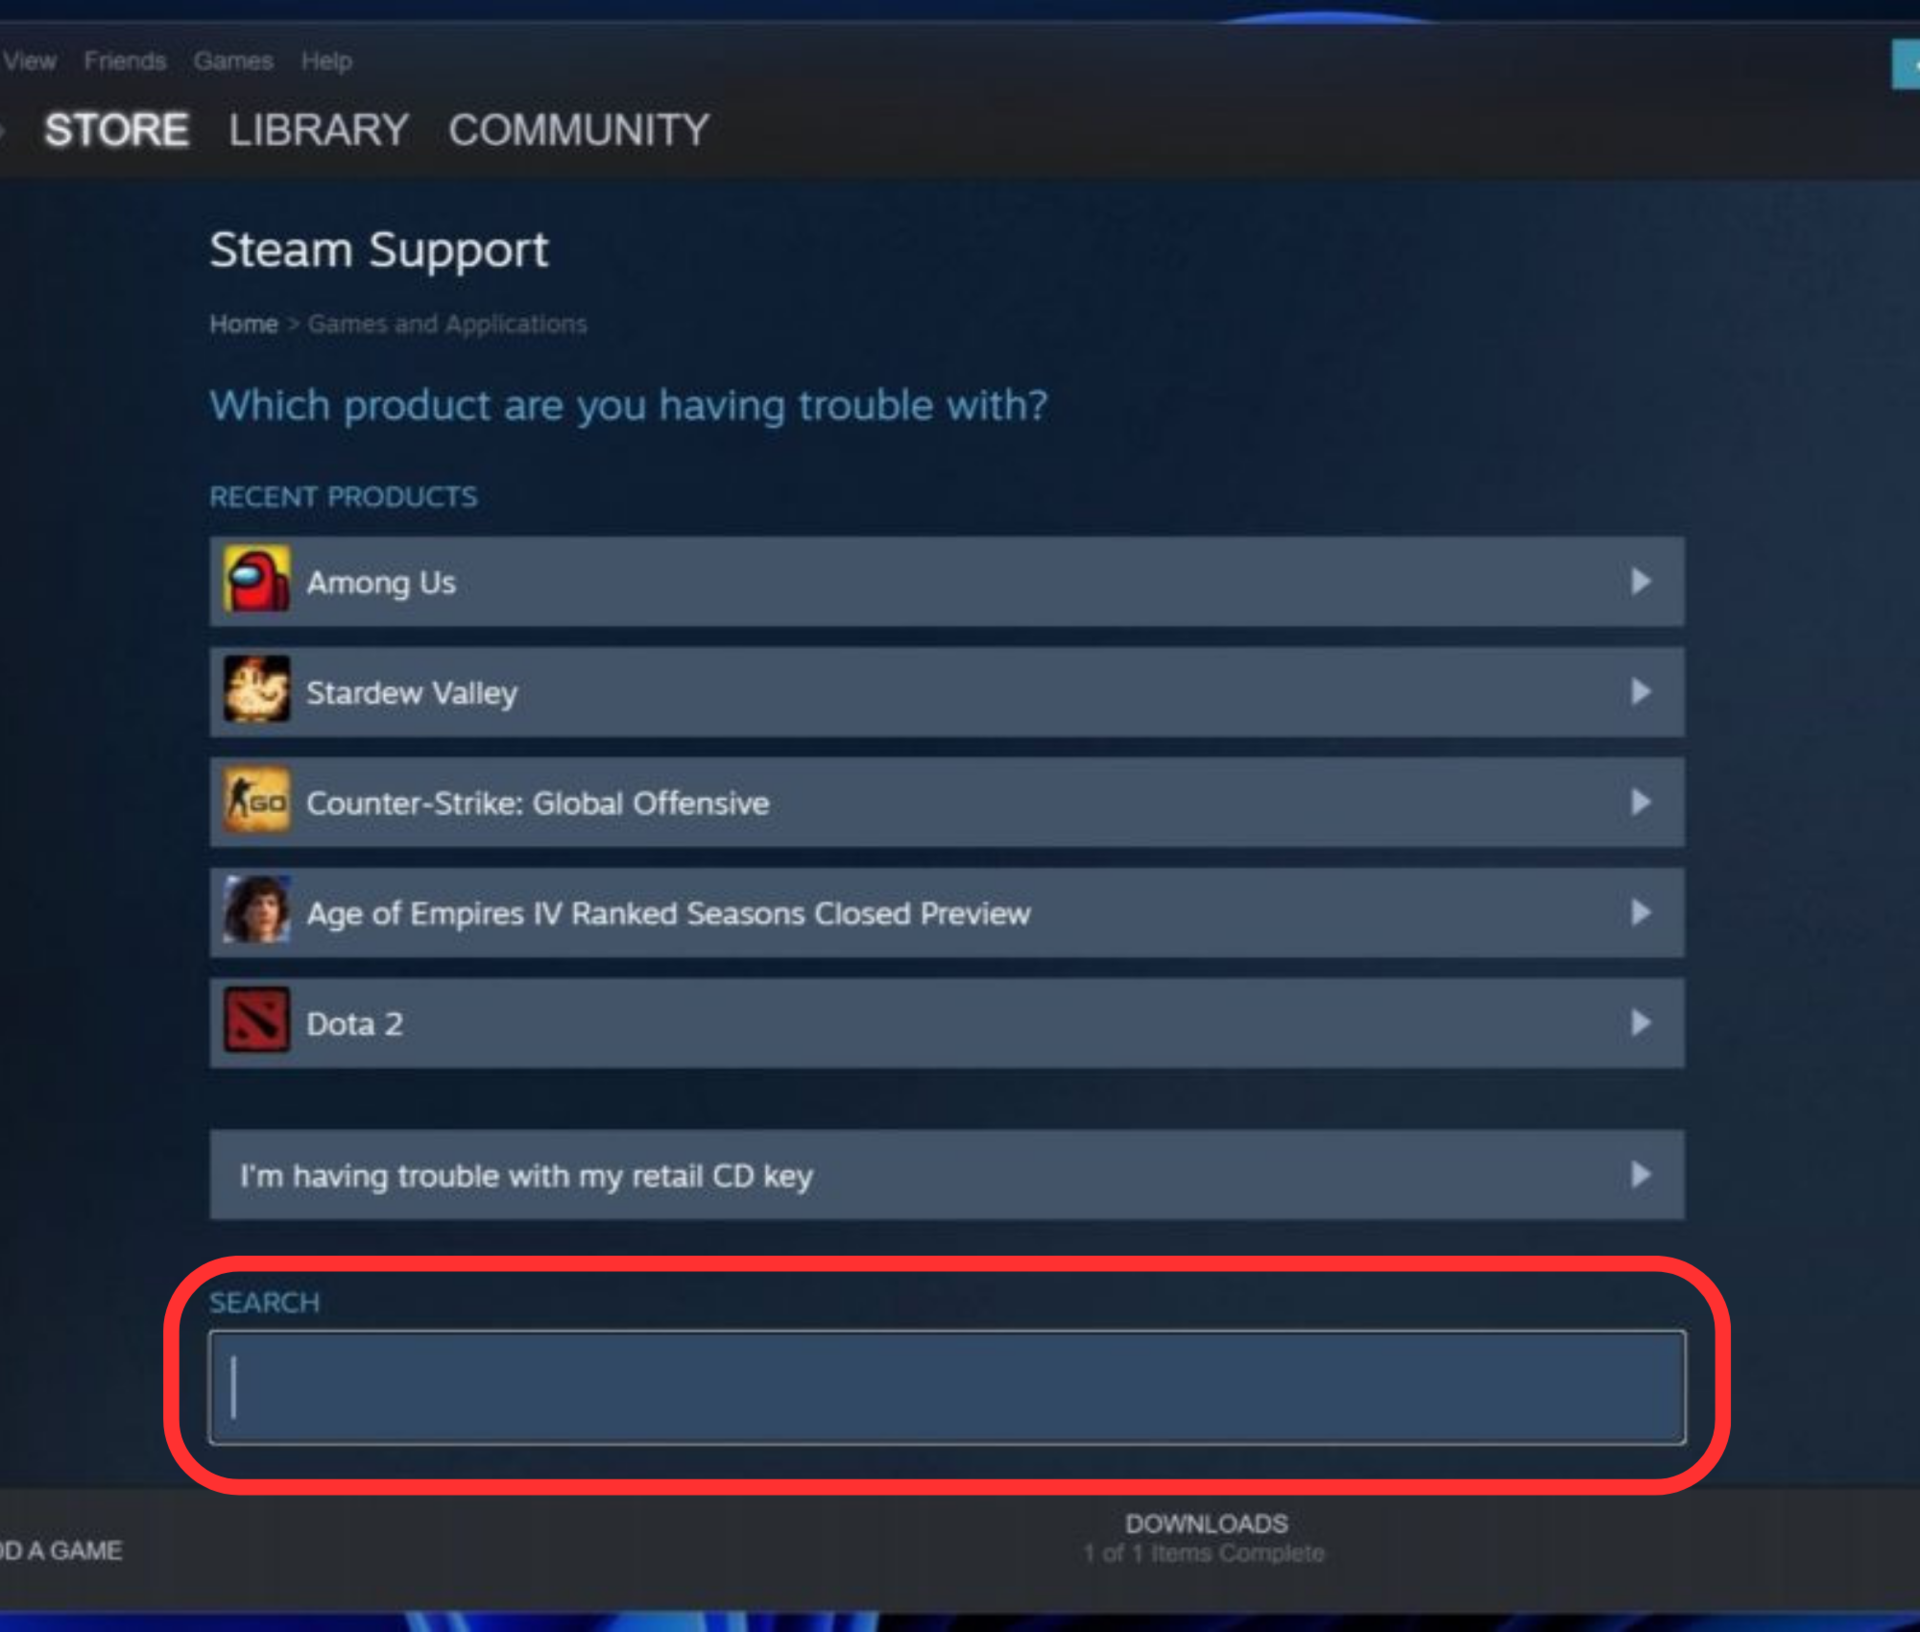 How to uninstall a Steam game